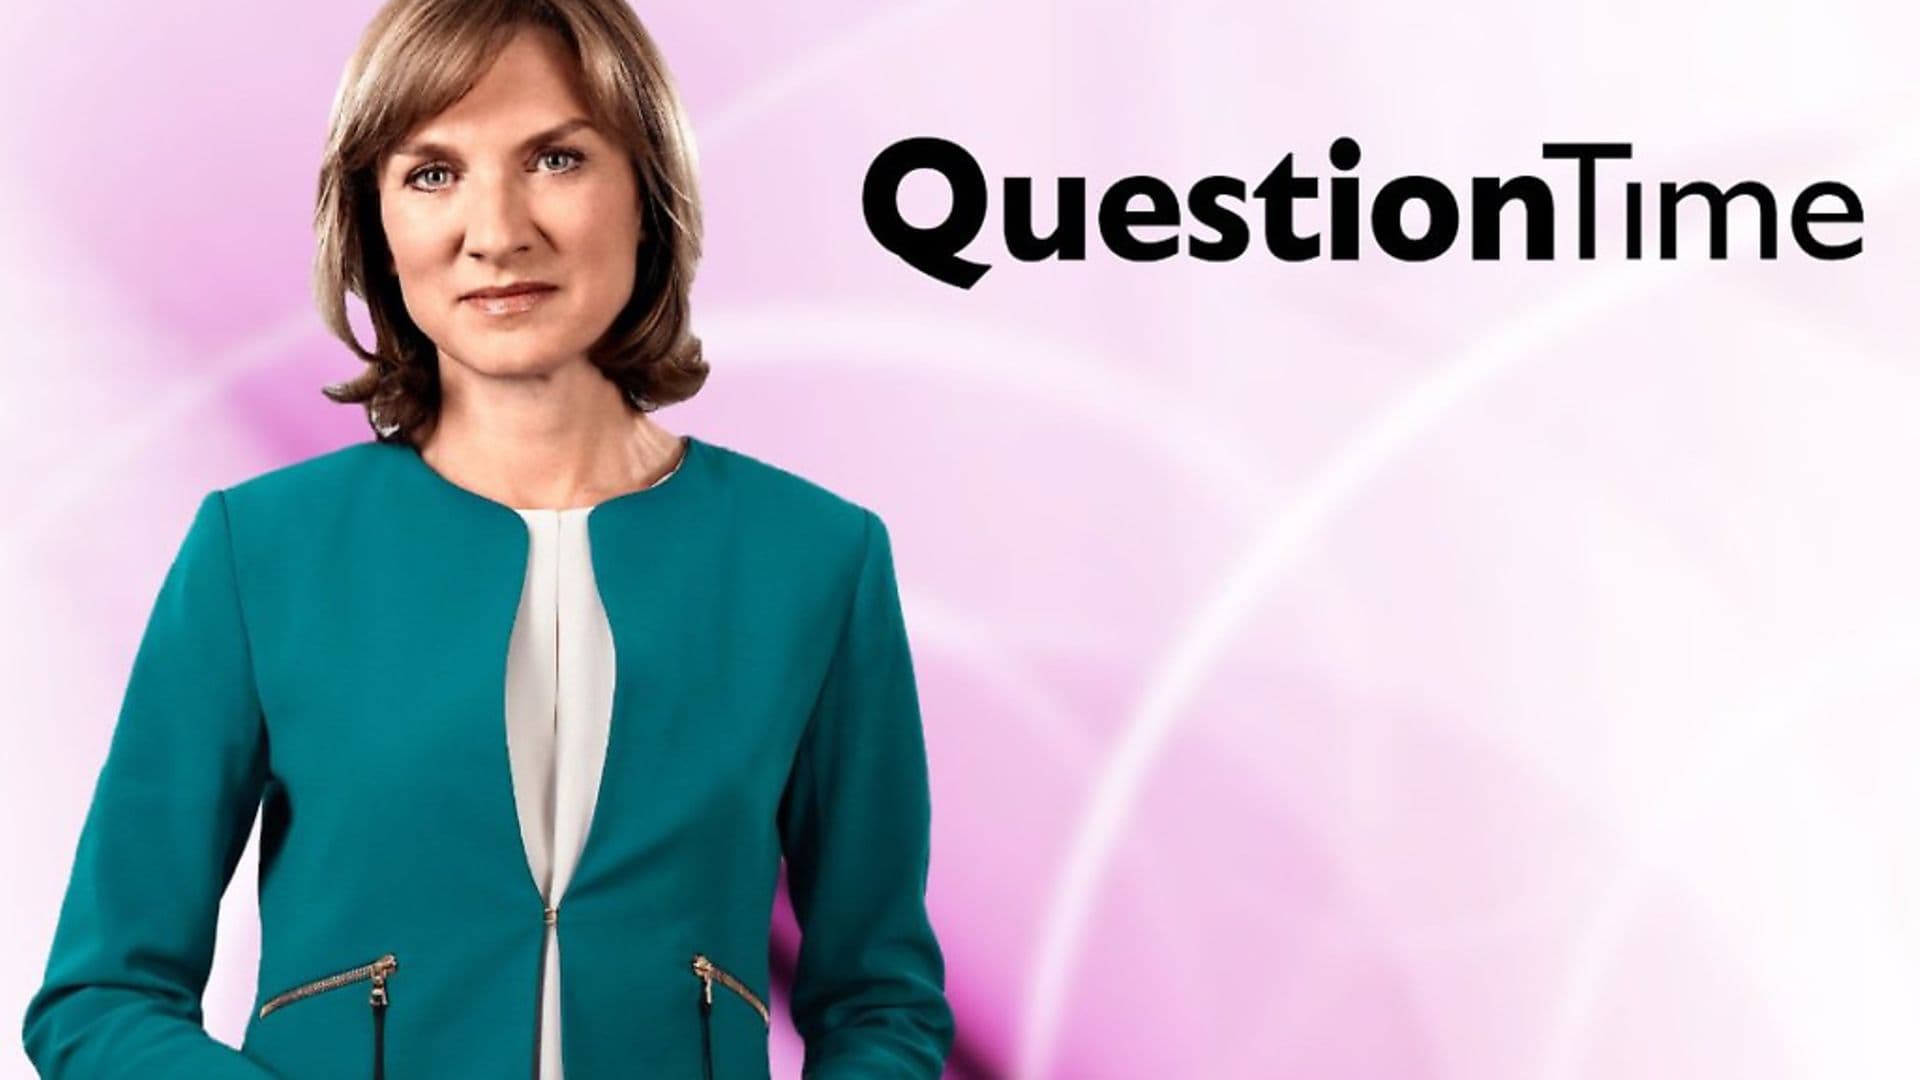 IMAGE: FIONA BRUCE - QUESTION TIME